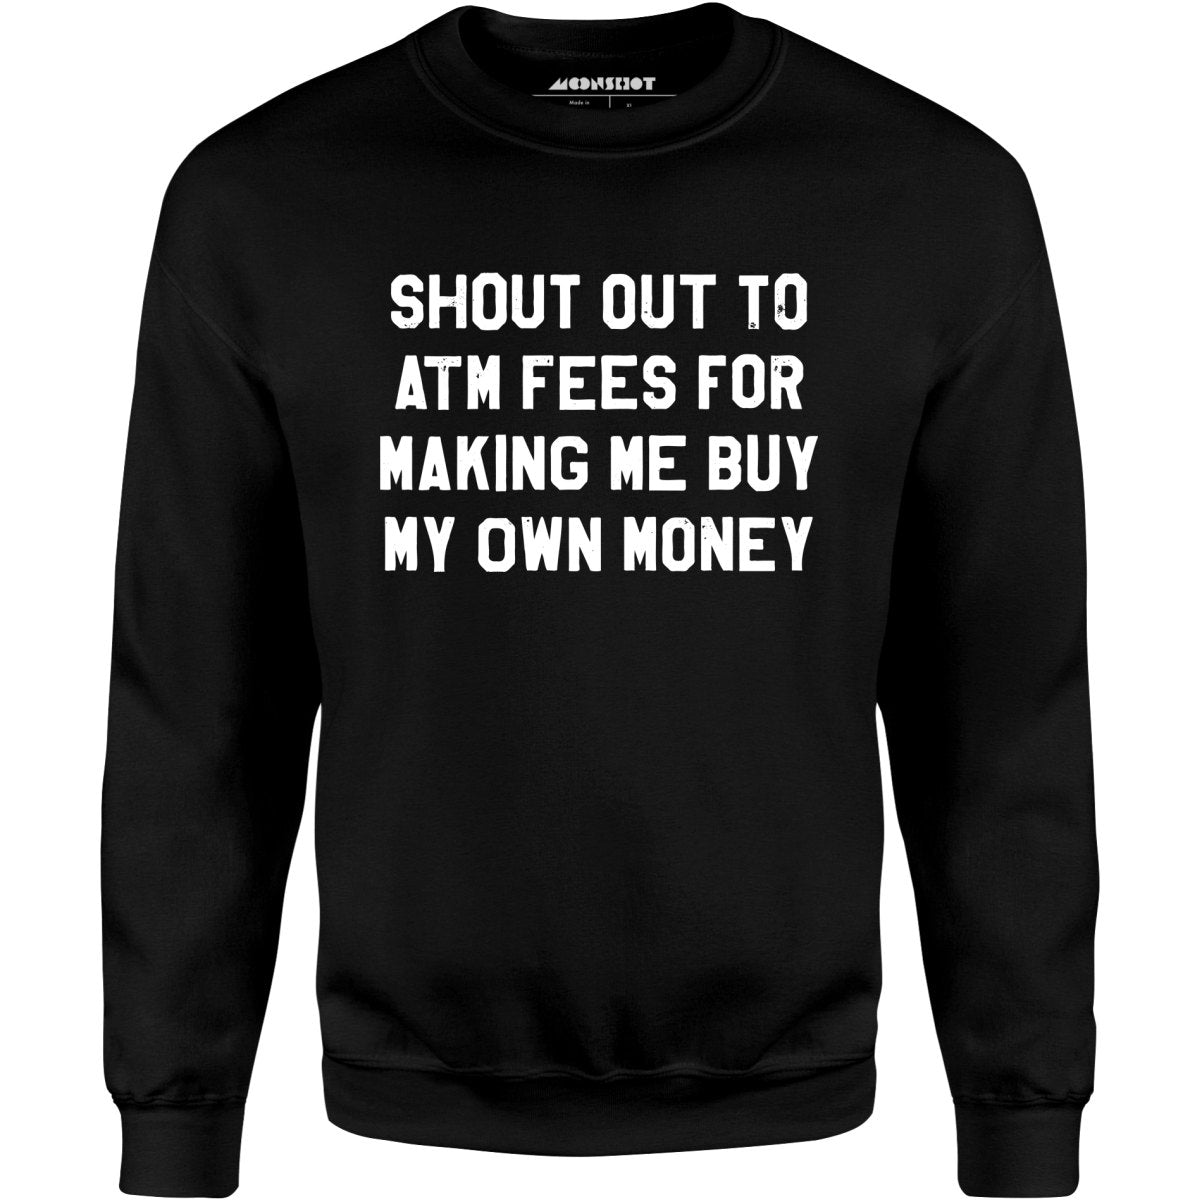 Shout Out to ATM Fees for Making Me Buy My Own Money - Unisex Sweatshirt